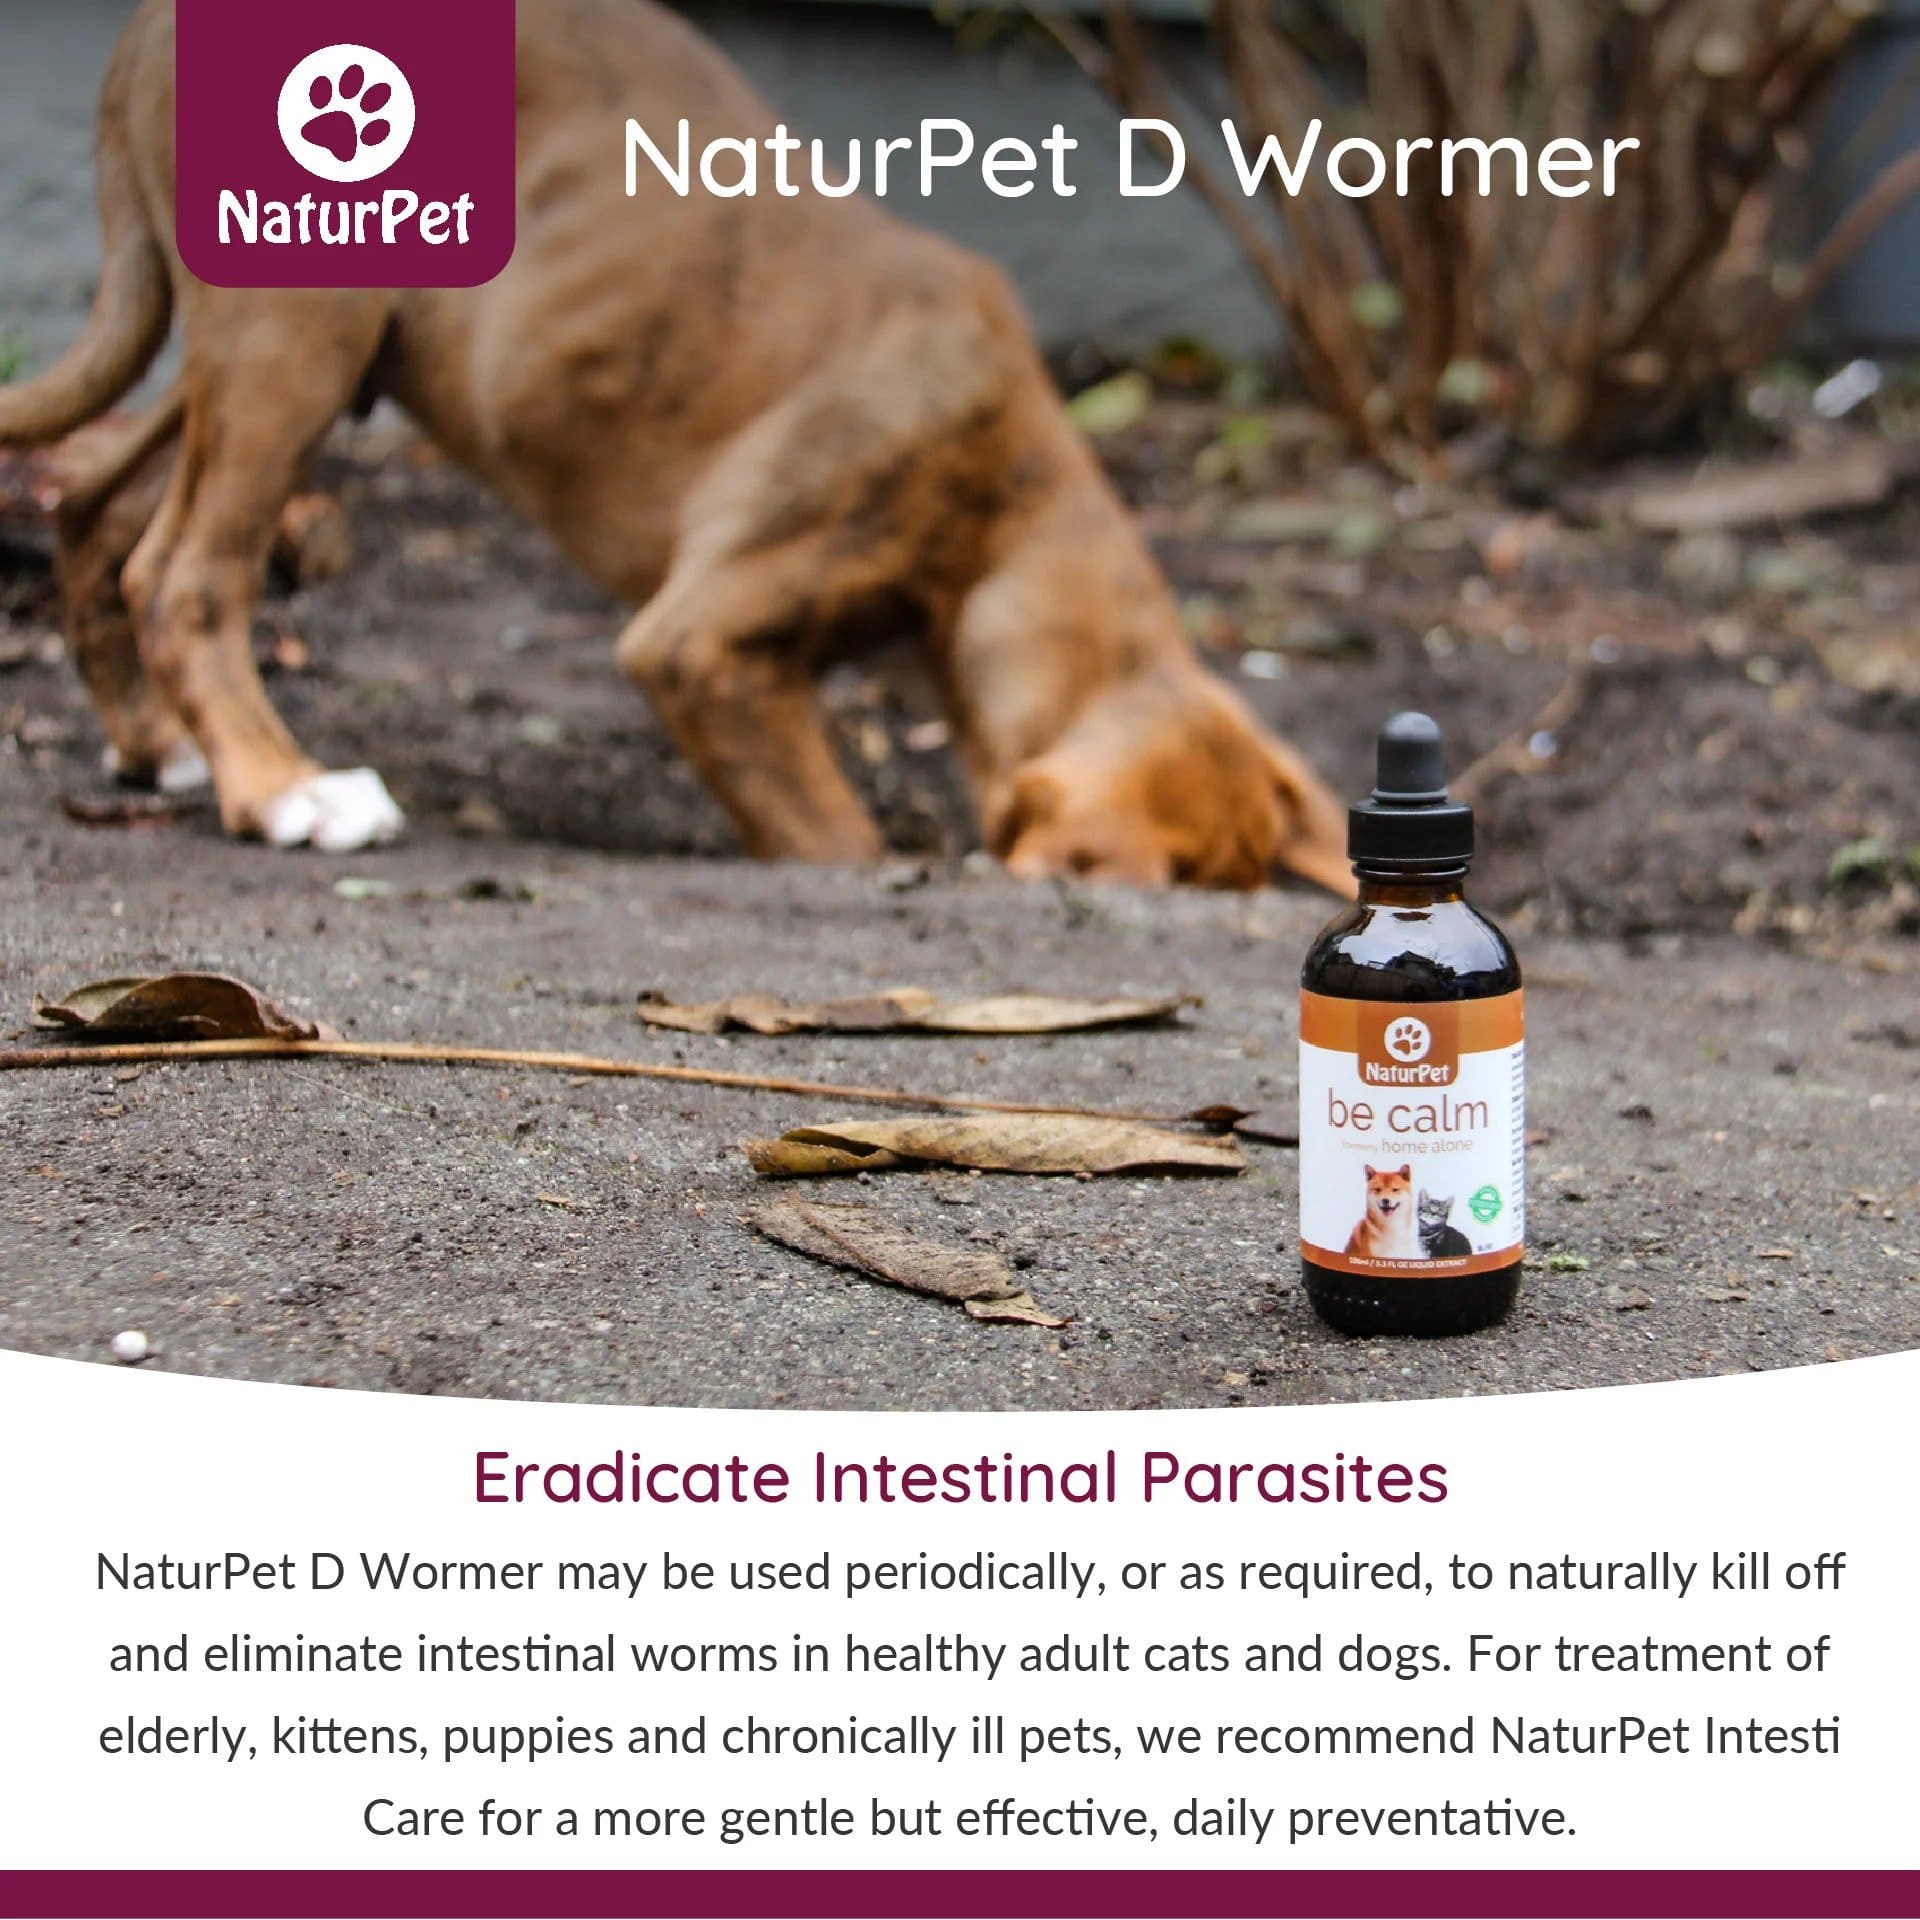 NaturPet D Wormer - All Natural Deworming for Cats and Dogs How to use